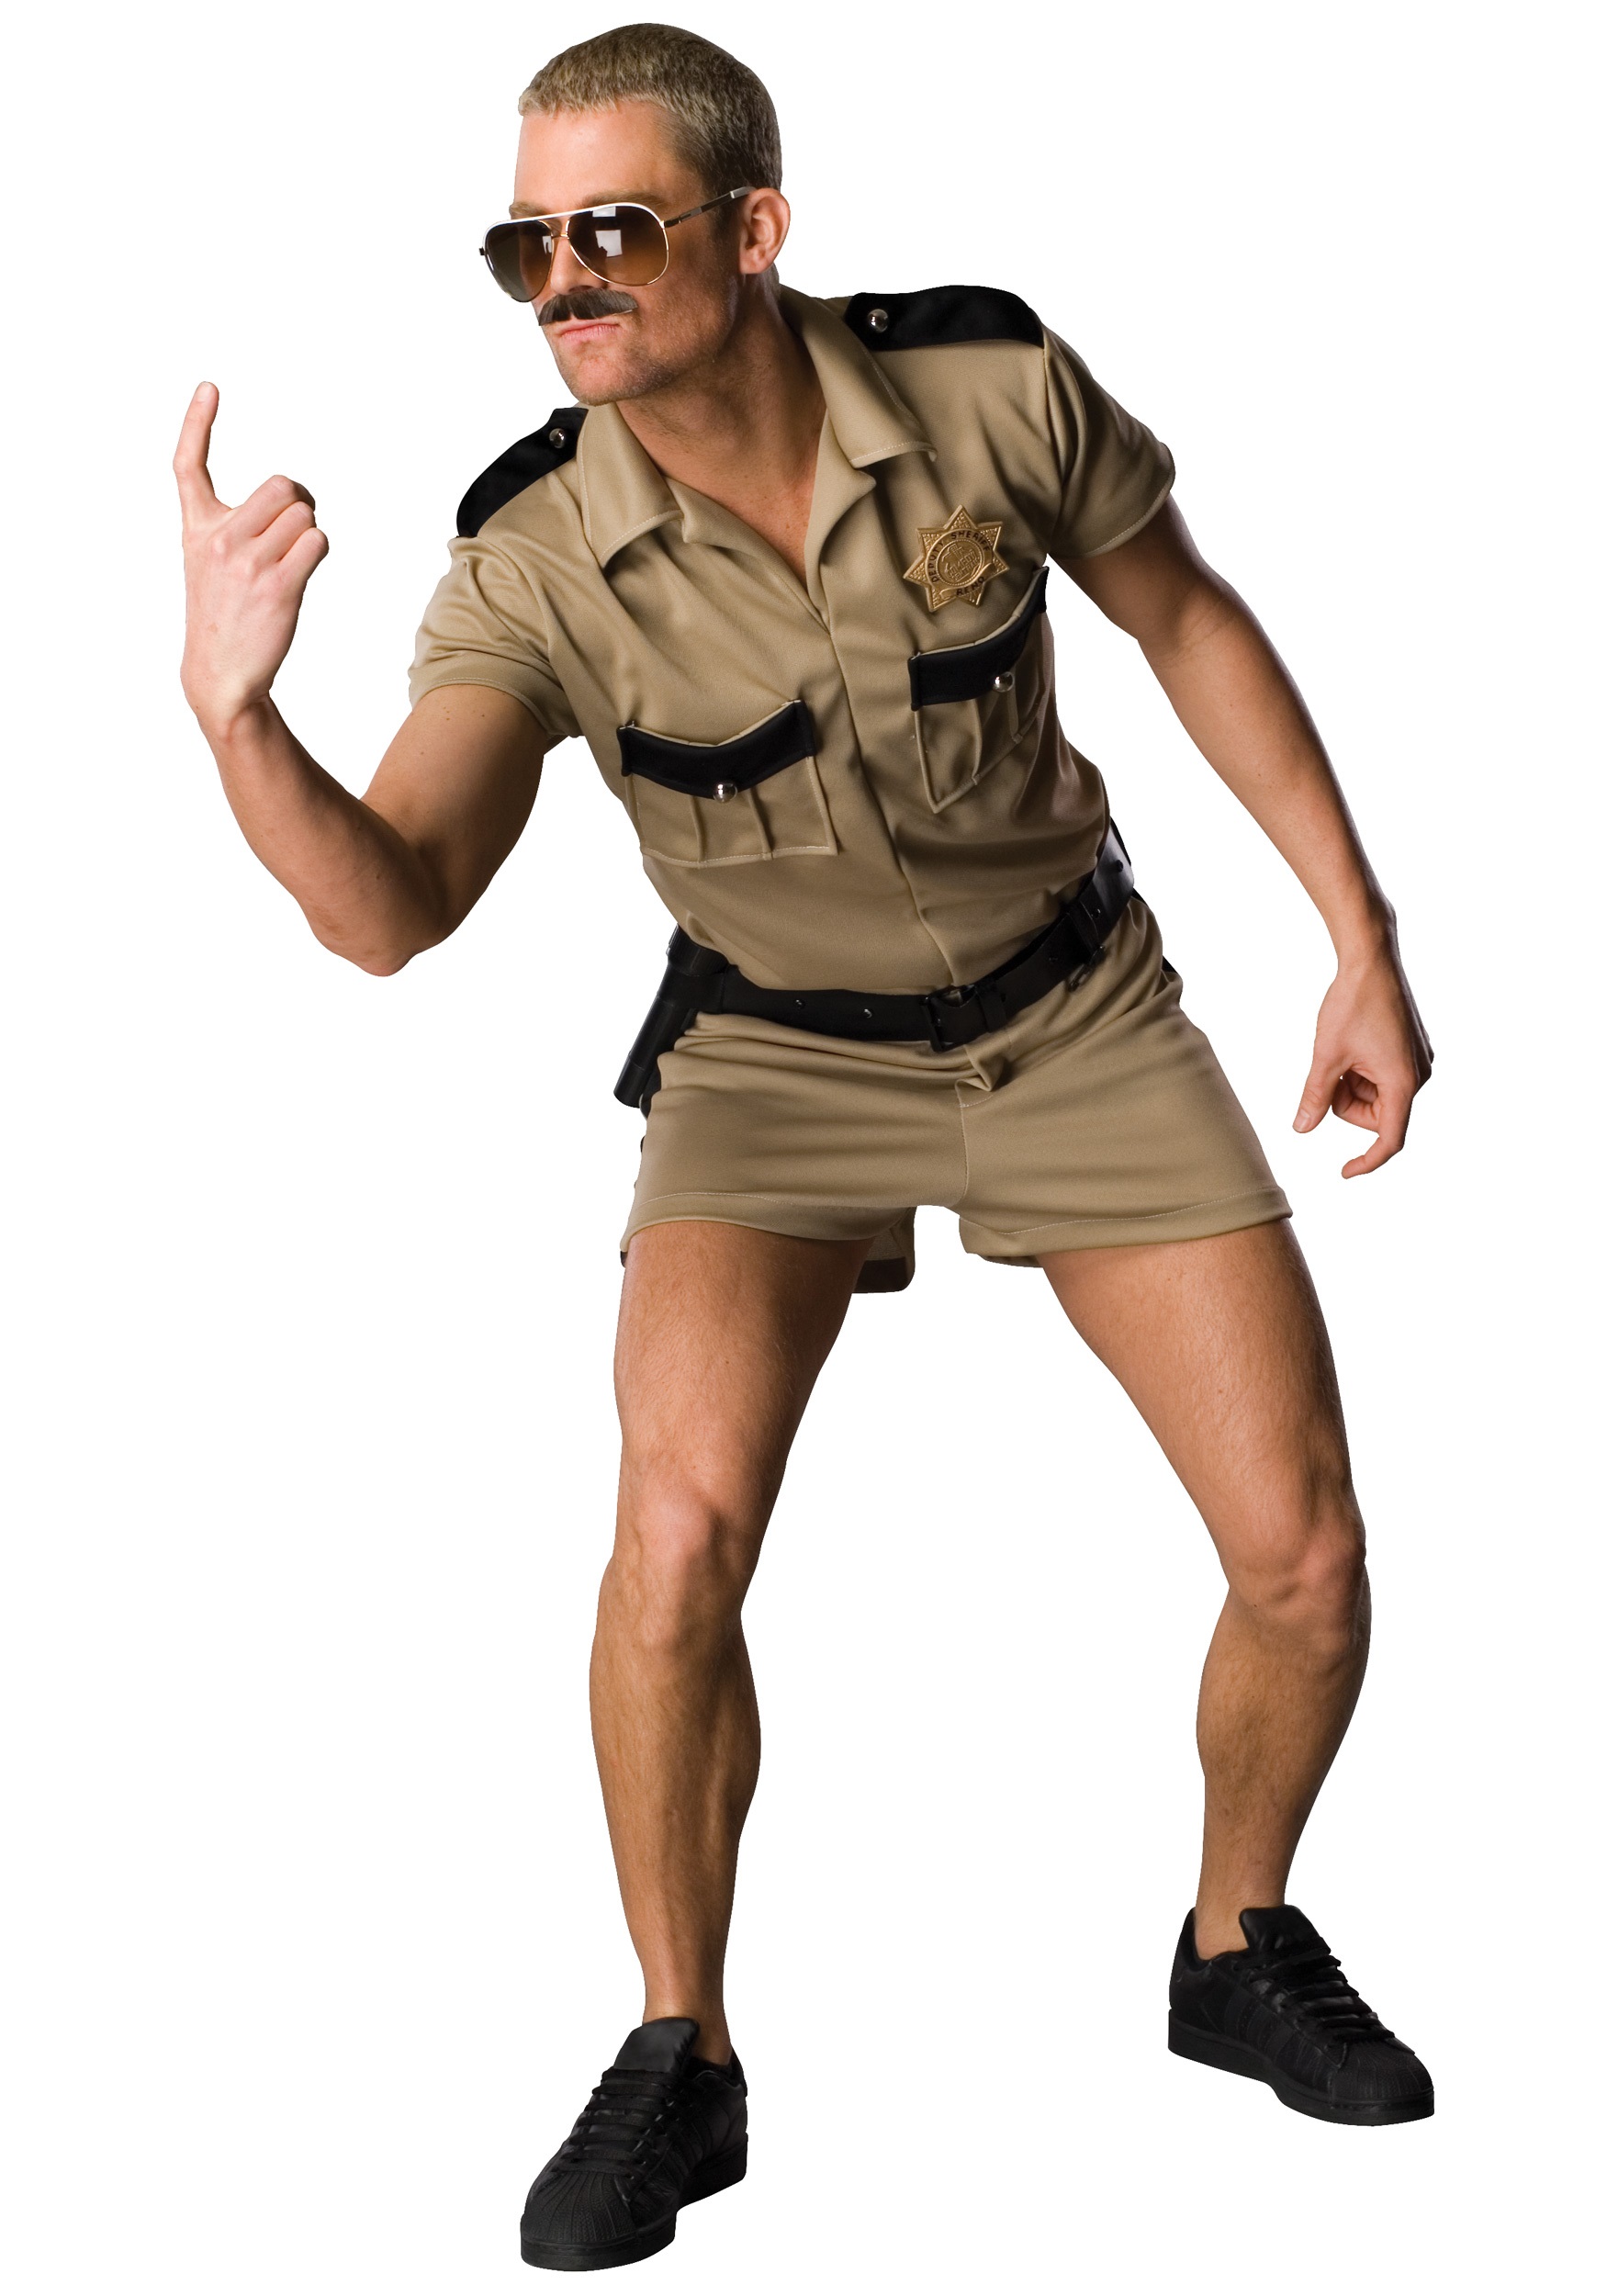 Lt. Dangle Costume | Comedy Central costumes | Police Officer